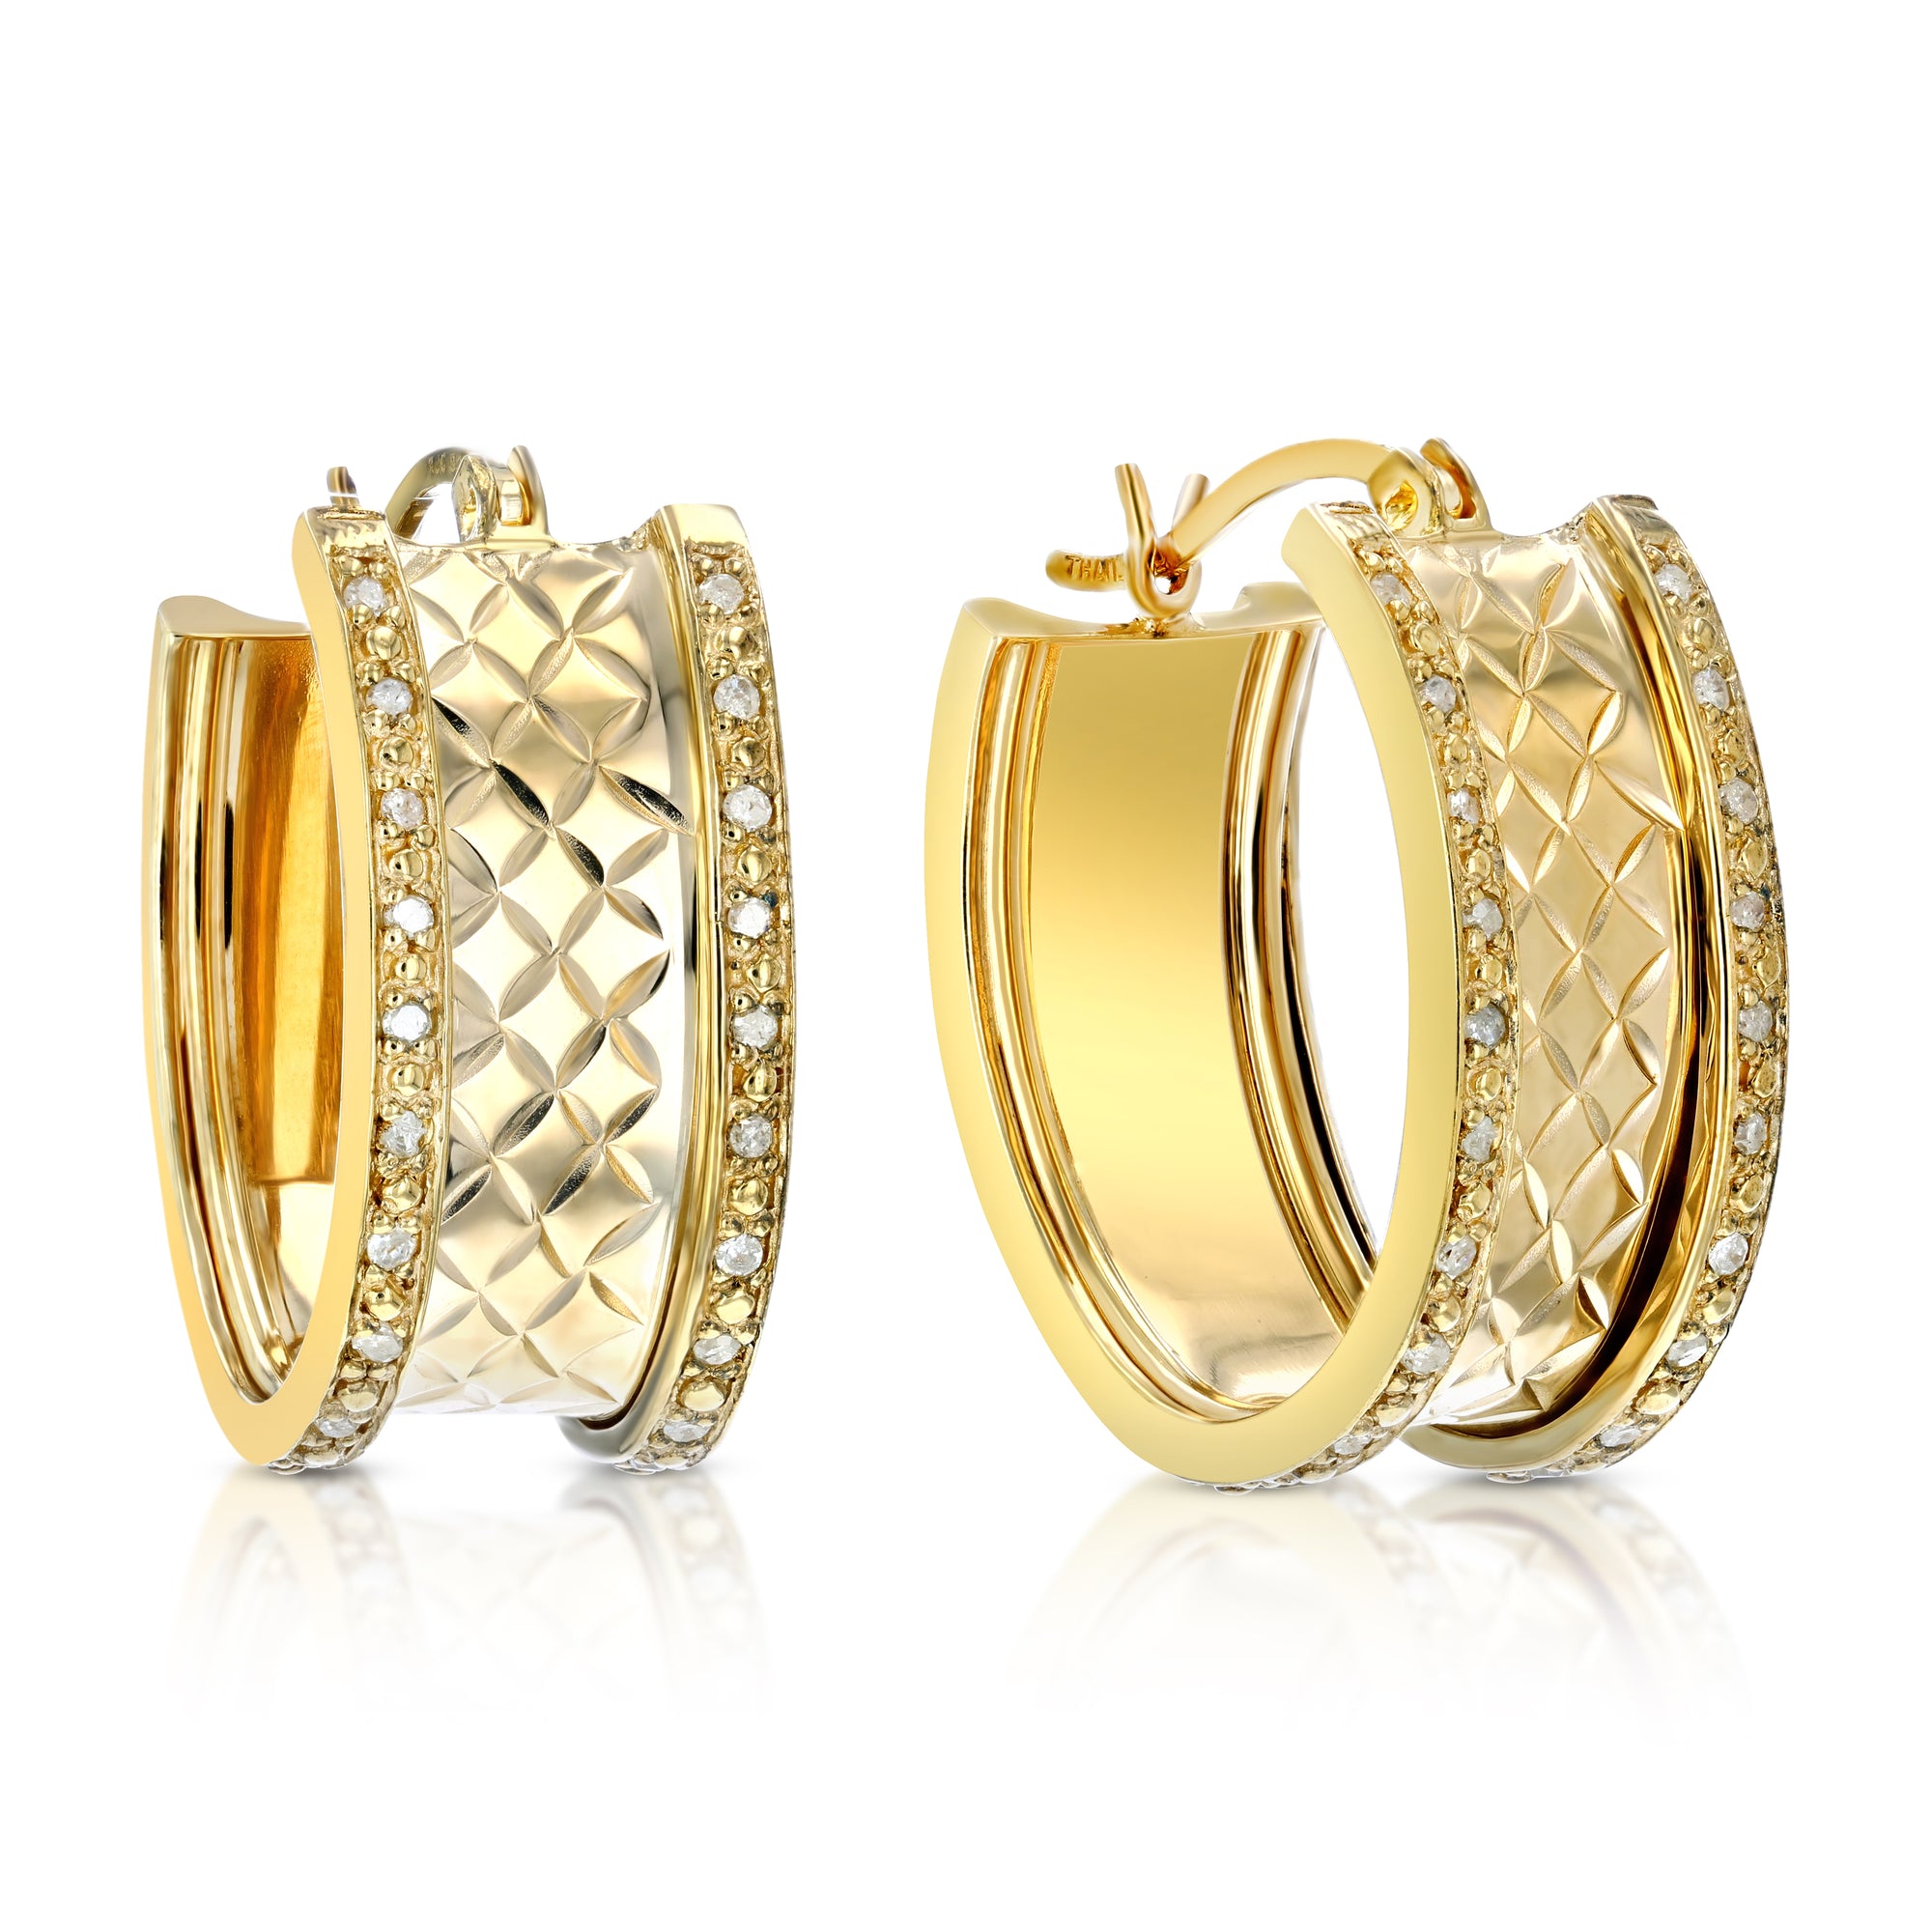 1/4 cttw Diamond Hoop Earrings Yellow Gold Plated over .925 Silver 1 Inch Design